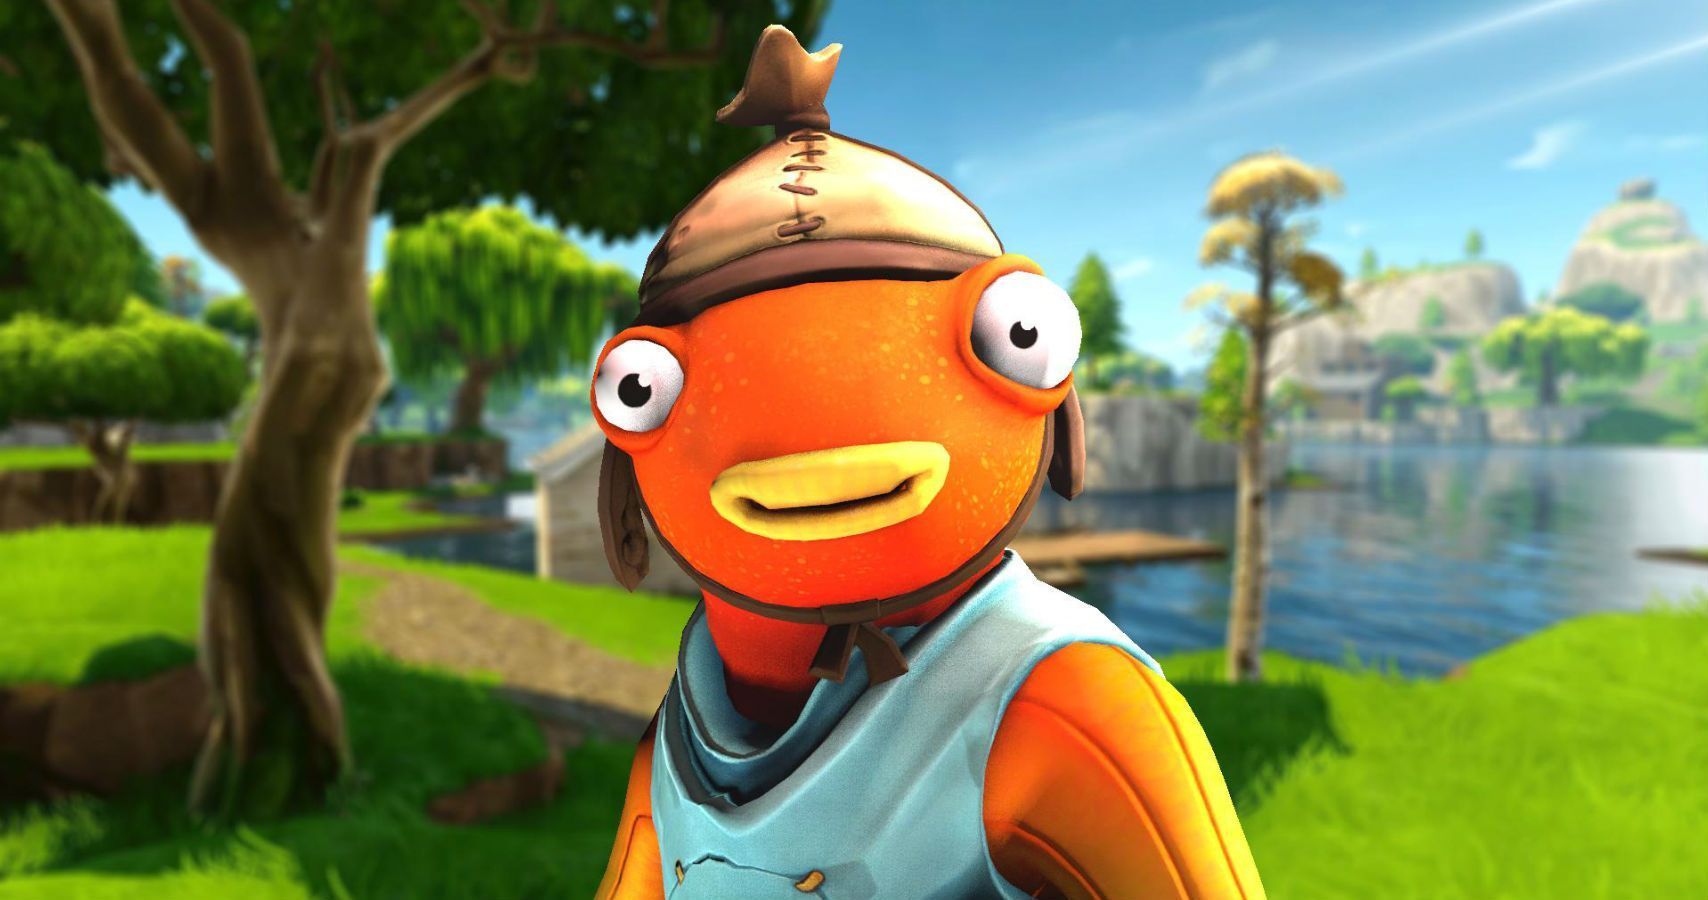 Watch: Fortnite's Fishstick Is Given A Voice In Hilarious New Skit. Gaming wallpaper, Best gaming wallpaper, Funny iphone wallpaper